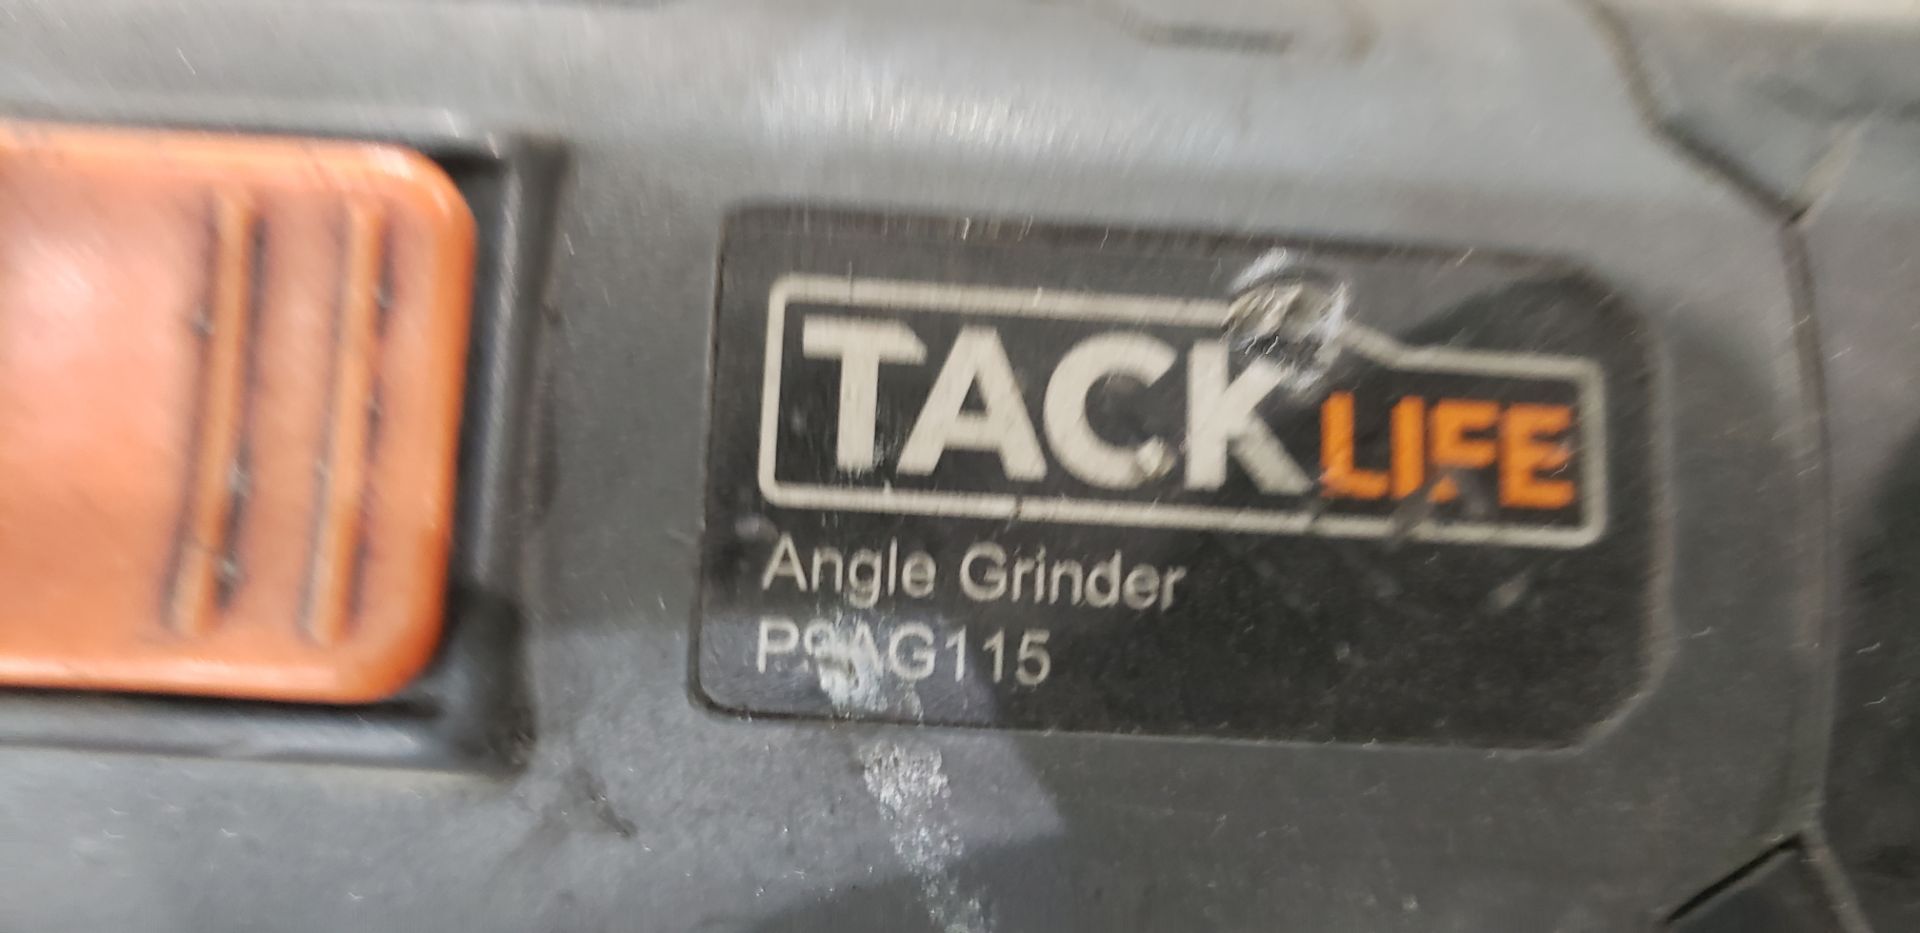 (1) Porter Cable PC750AG & (1) Tack Life P9AG115 Angle Grinders - Image 3 of 4